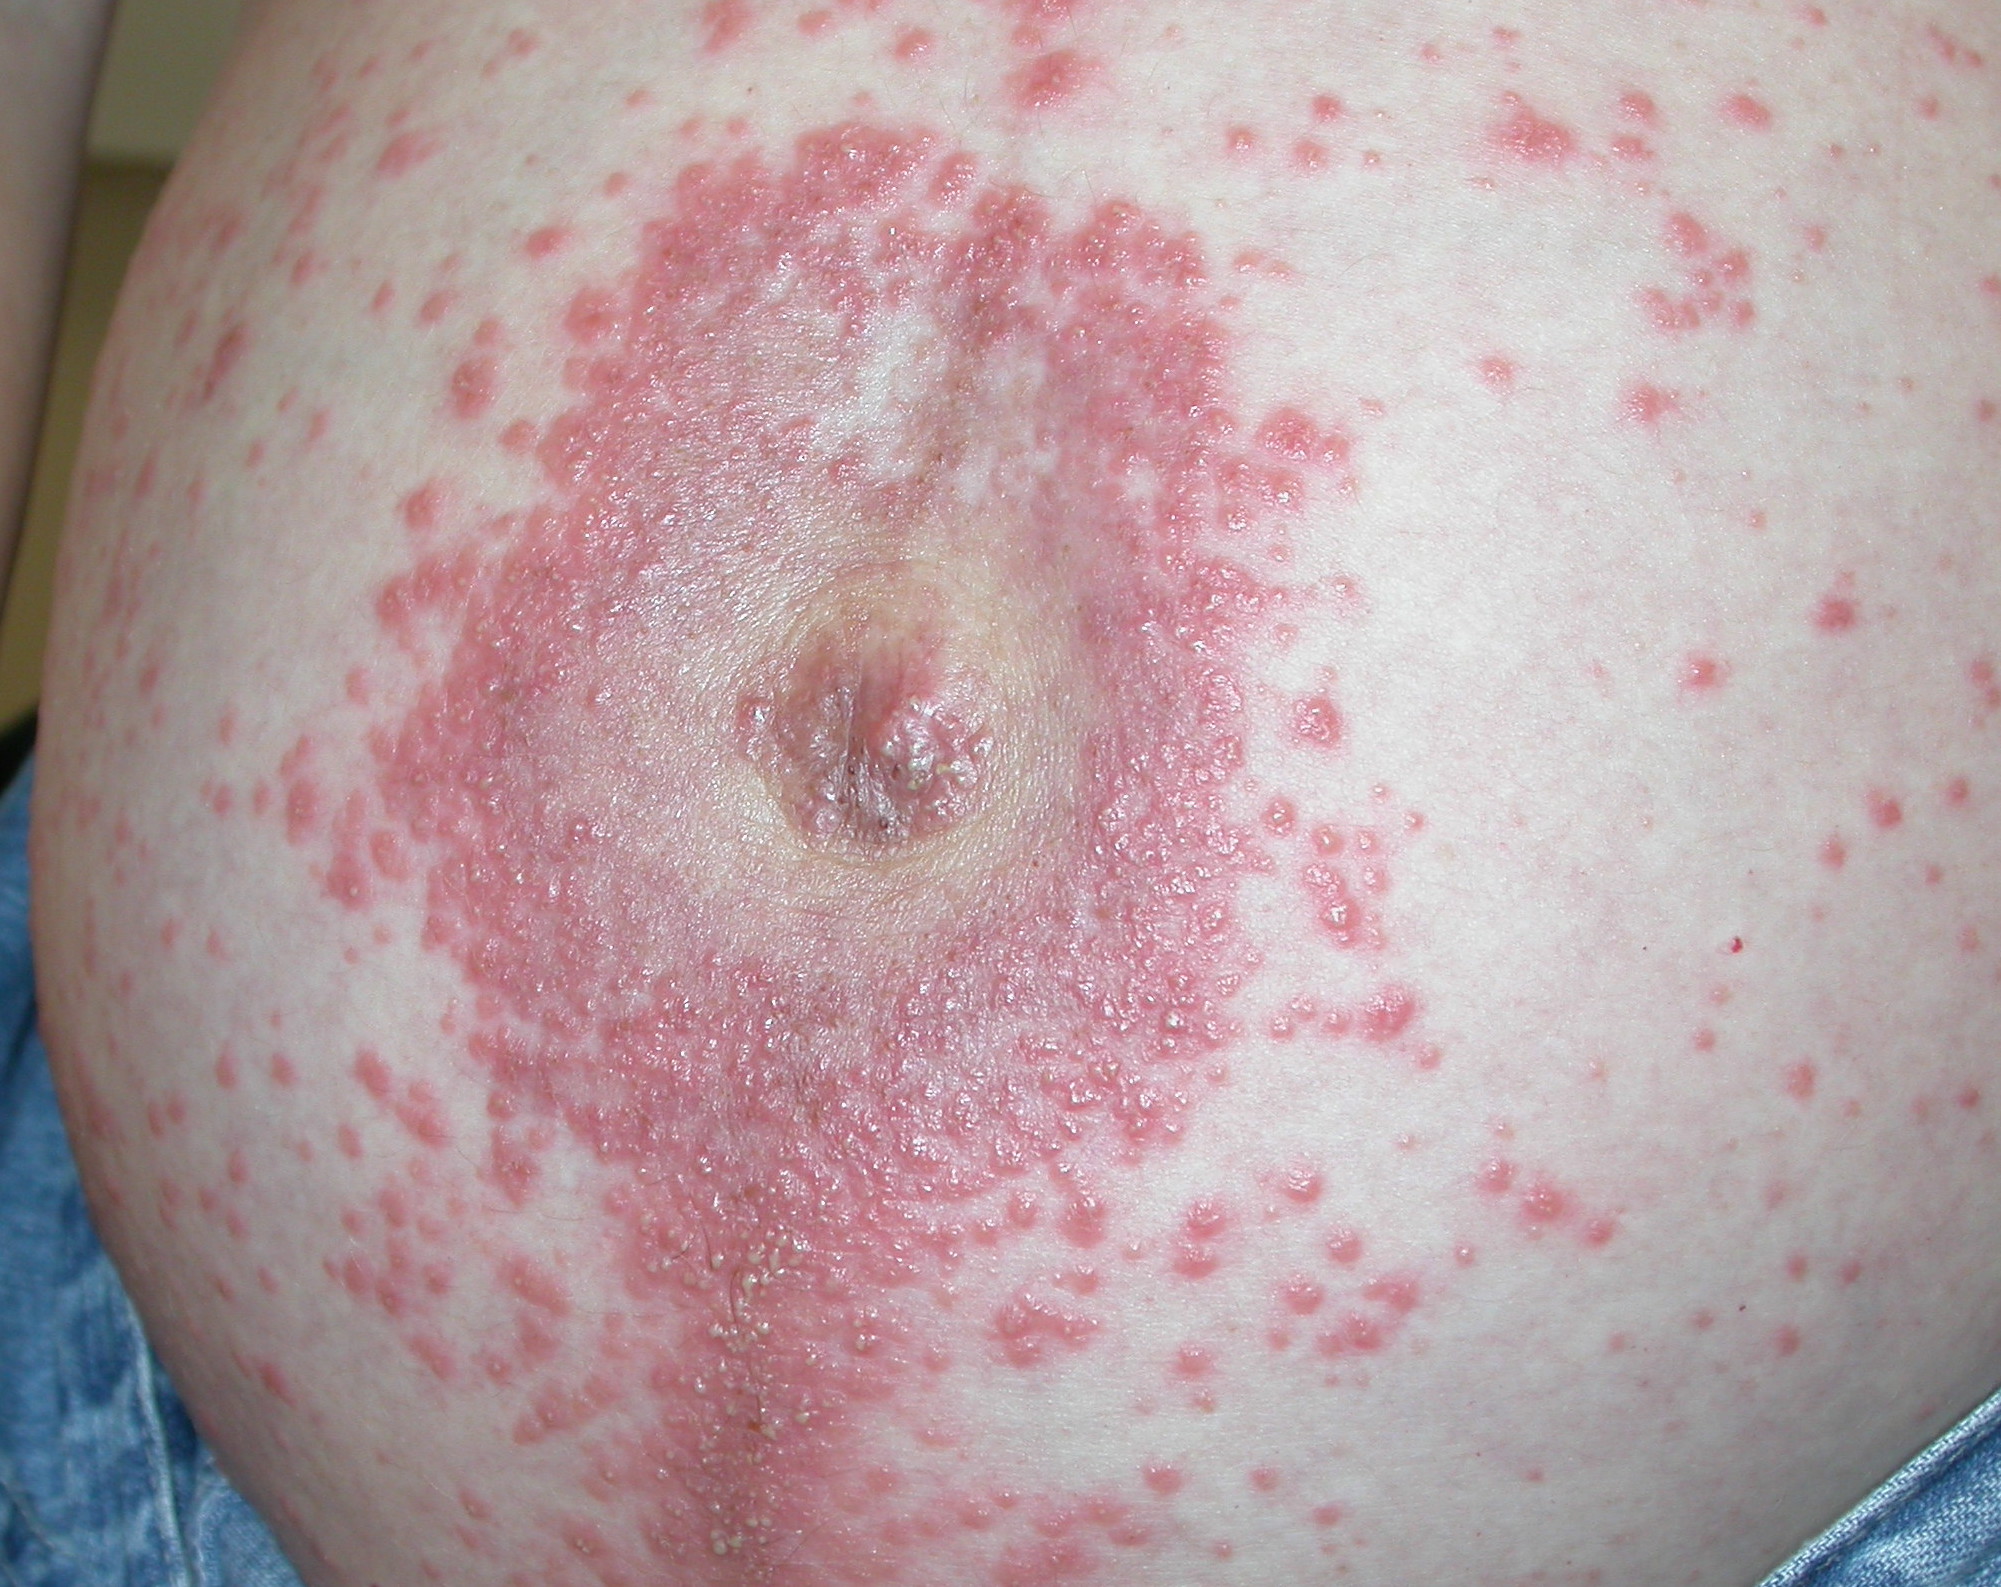 Pruritic Urticarial Papules and Plaques of Pregnancy